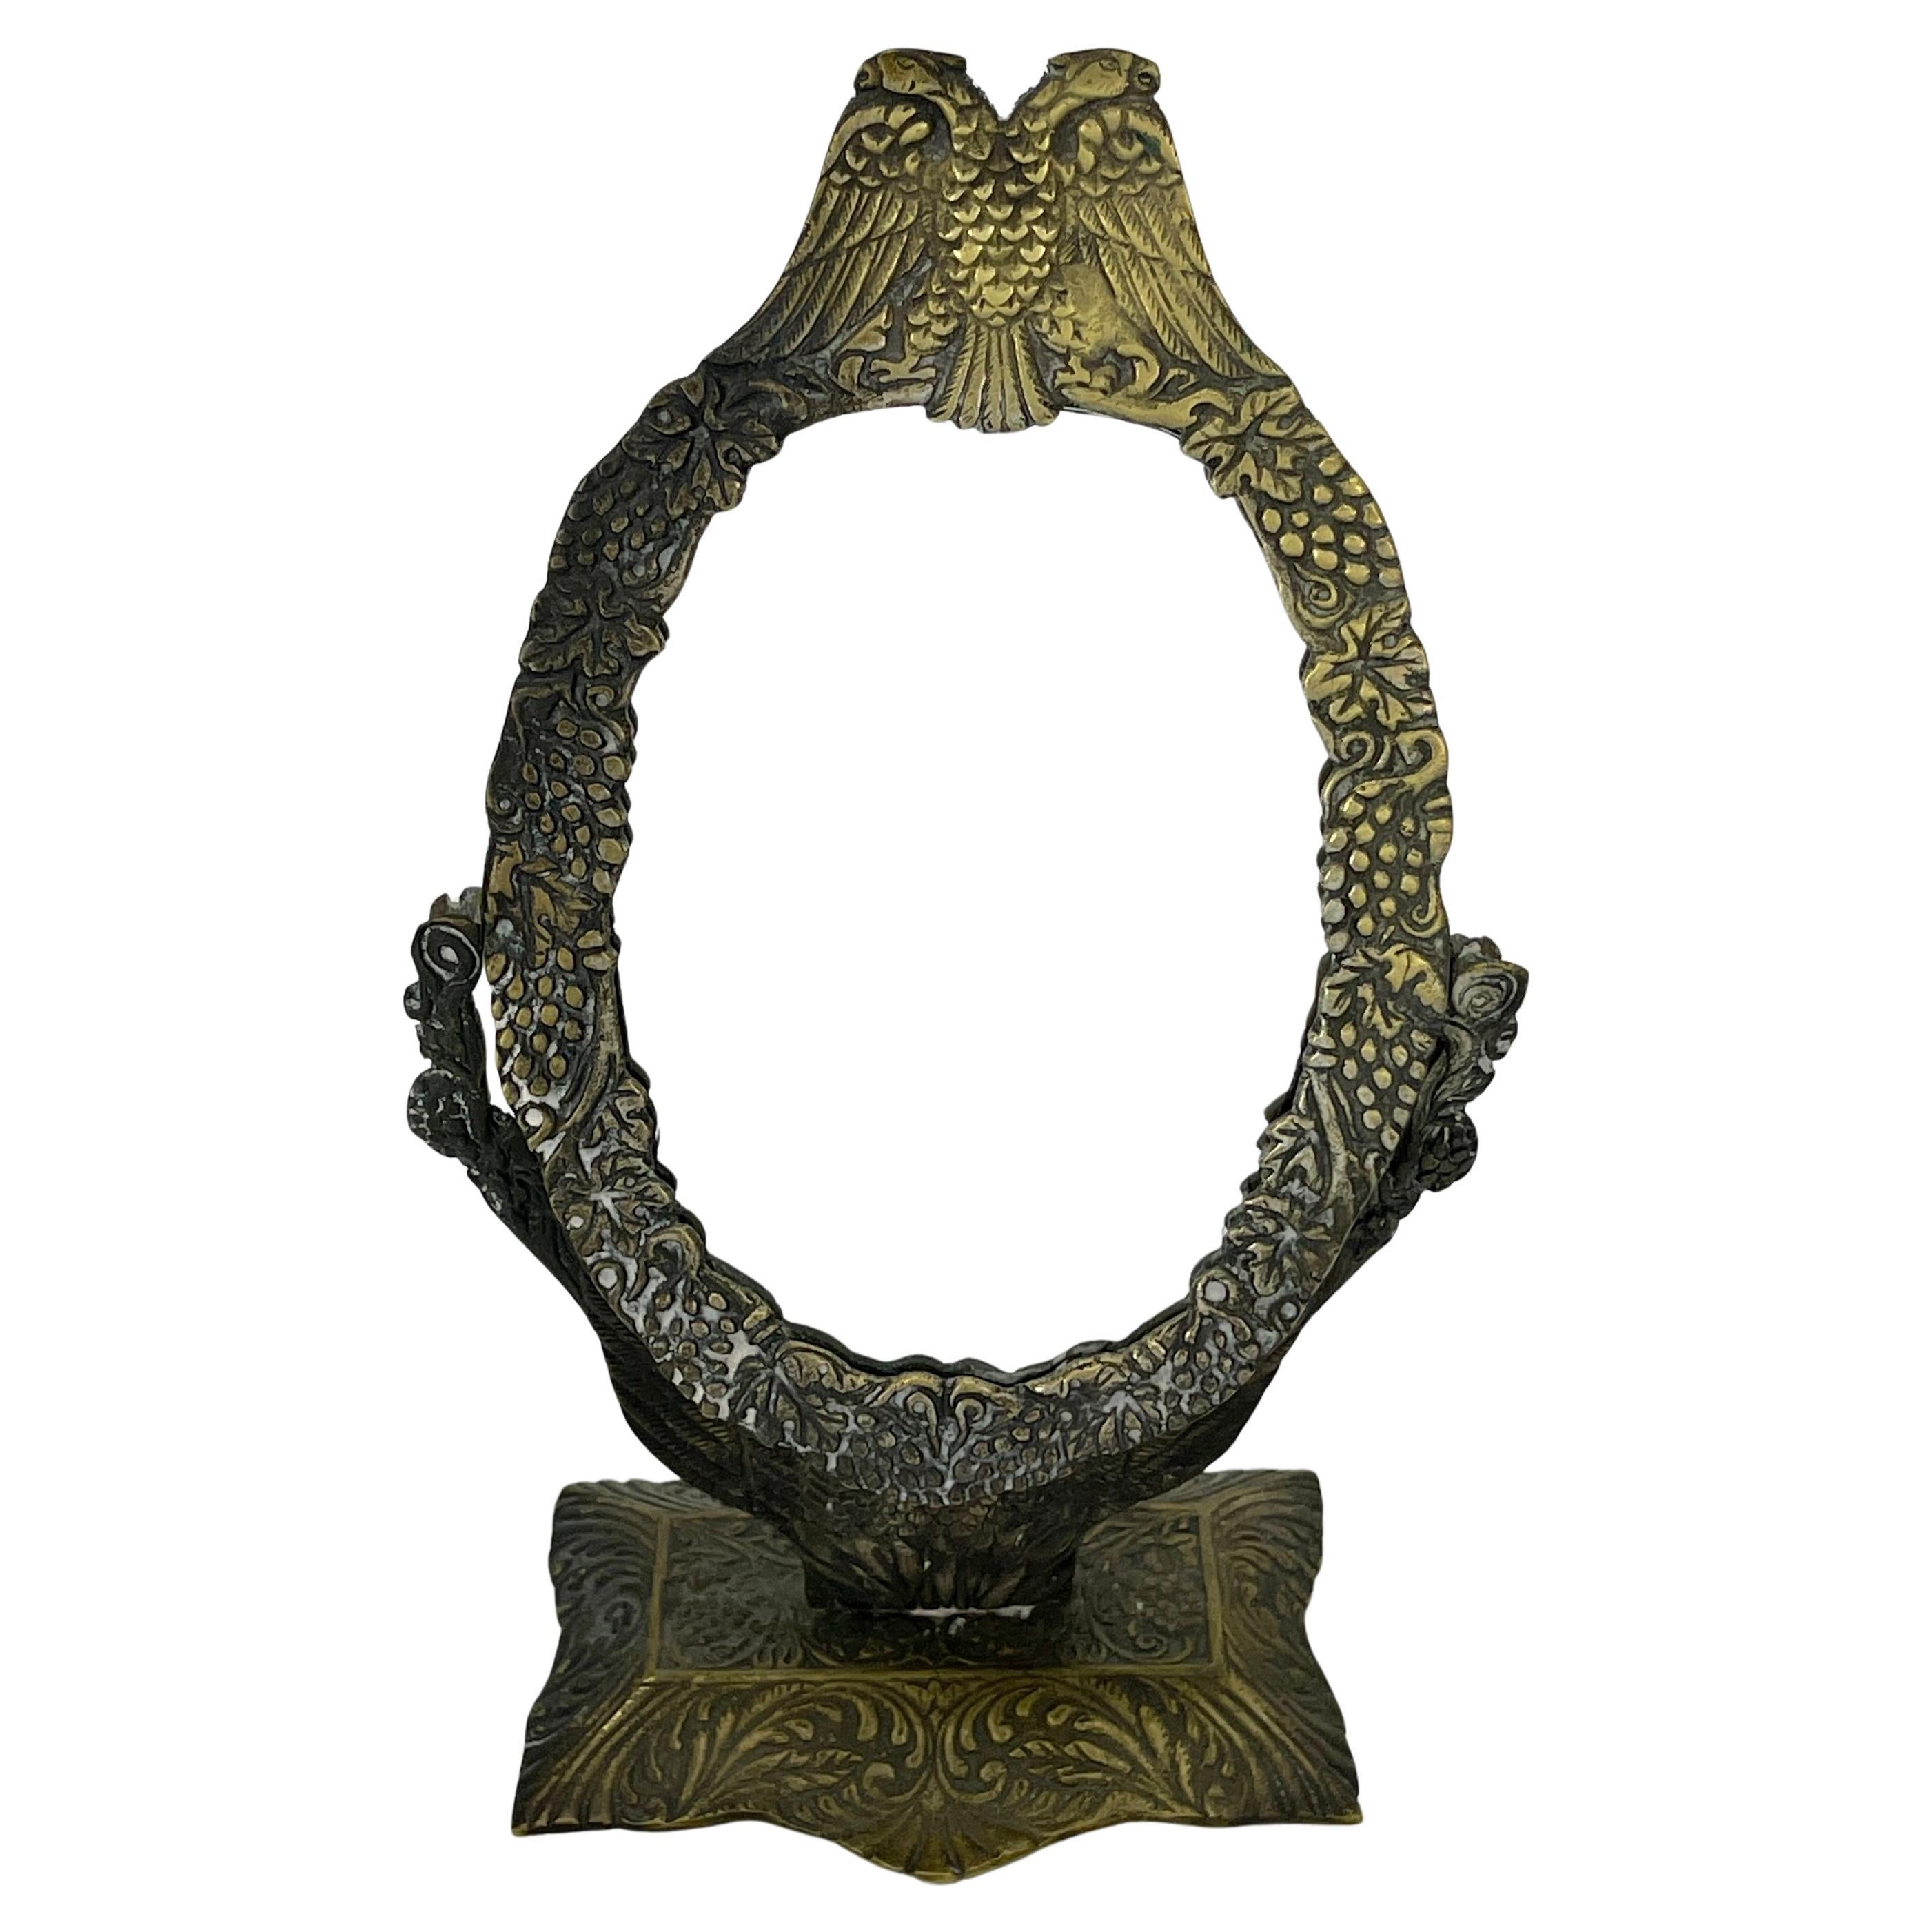 Small bronze vanity mirror with double eagle and floral decoration On a Rectangular Base.
The mirror could be Russian, French or Austrian.